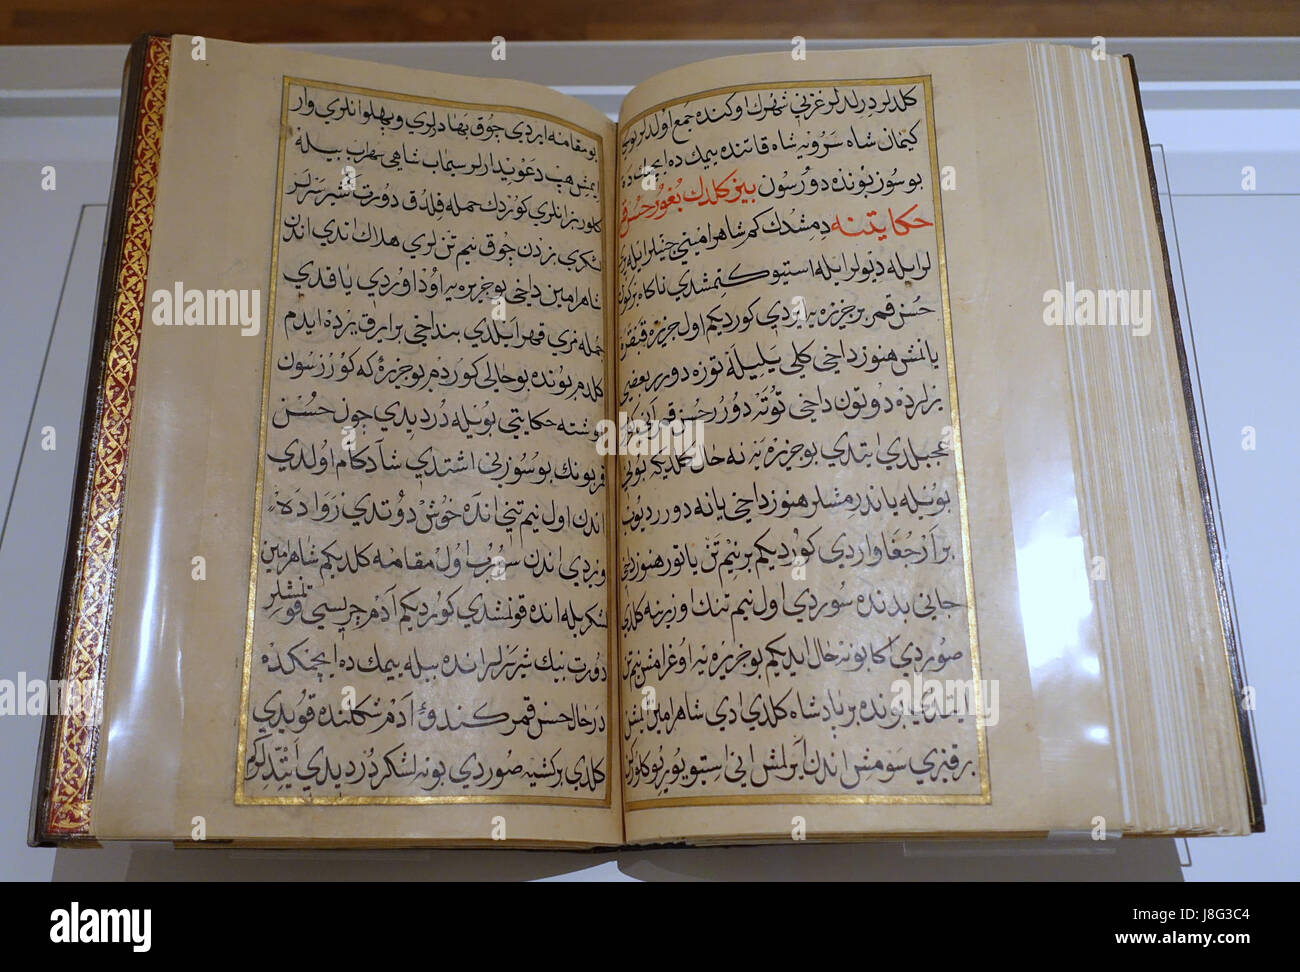 Manuscript from Tuhfet ul Leta'if (Curious and Witty Gifts) by 'Ali ibn Naqib Hamza, Turkey, 1593 1594 AD, ink, colour, gold on paper   Aga Khan Museum   Toronto, Canada   DSC06763 Stock Photo